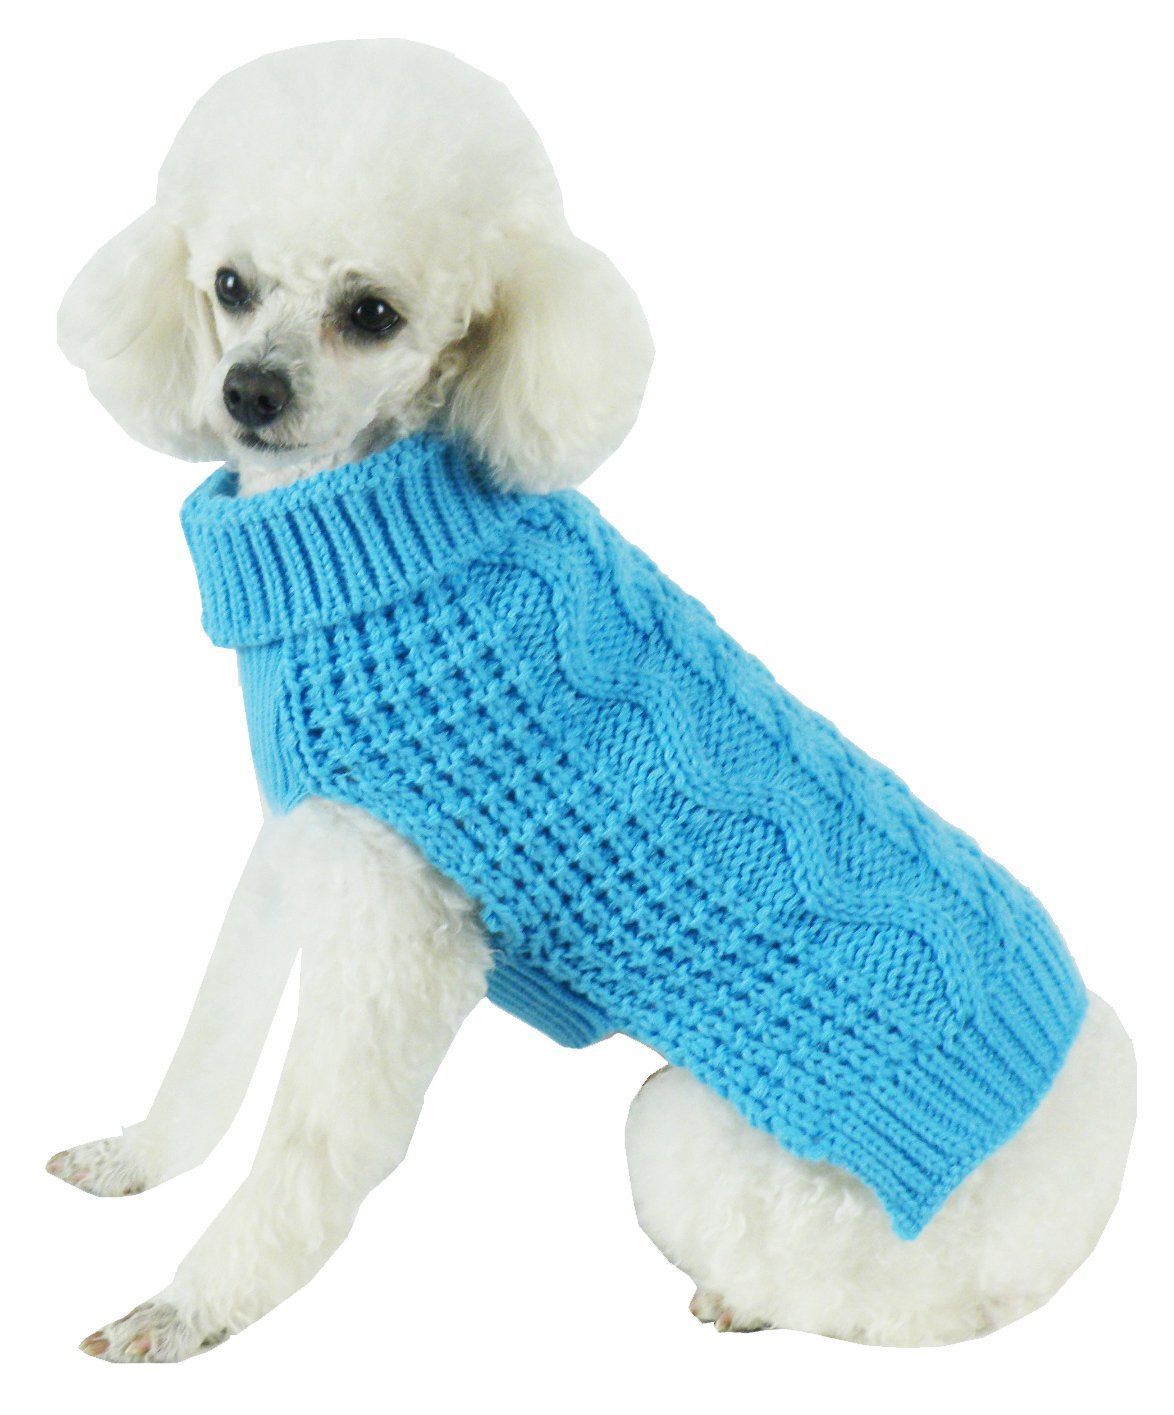 Pet Life ® 'Swivel-Swirl' Heavy Cable Knitted Fashion Designer Dog Sweater X-Small Light Blue